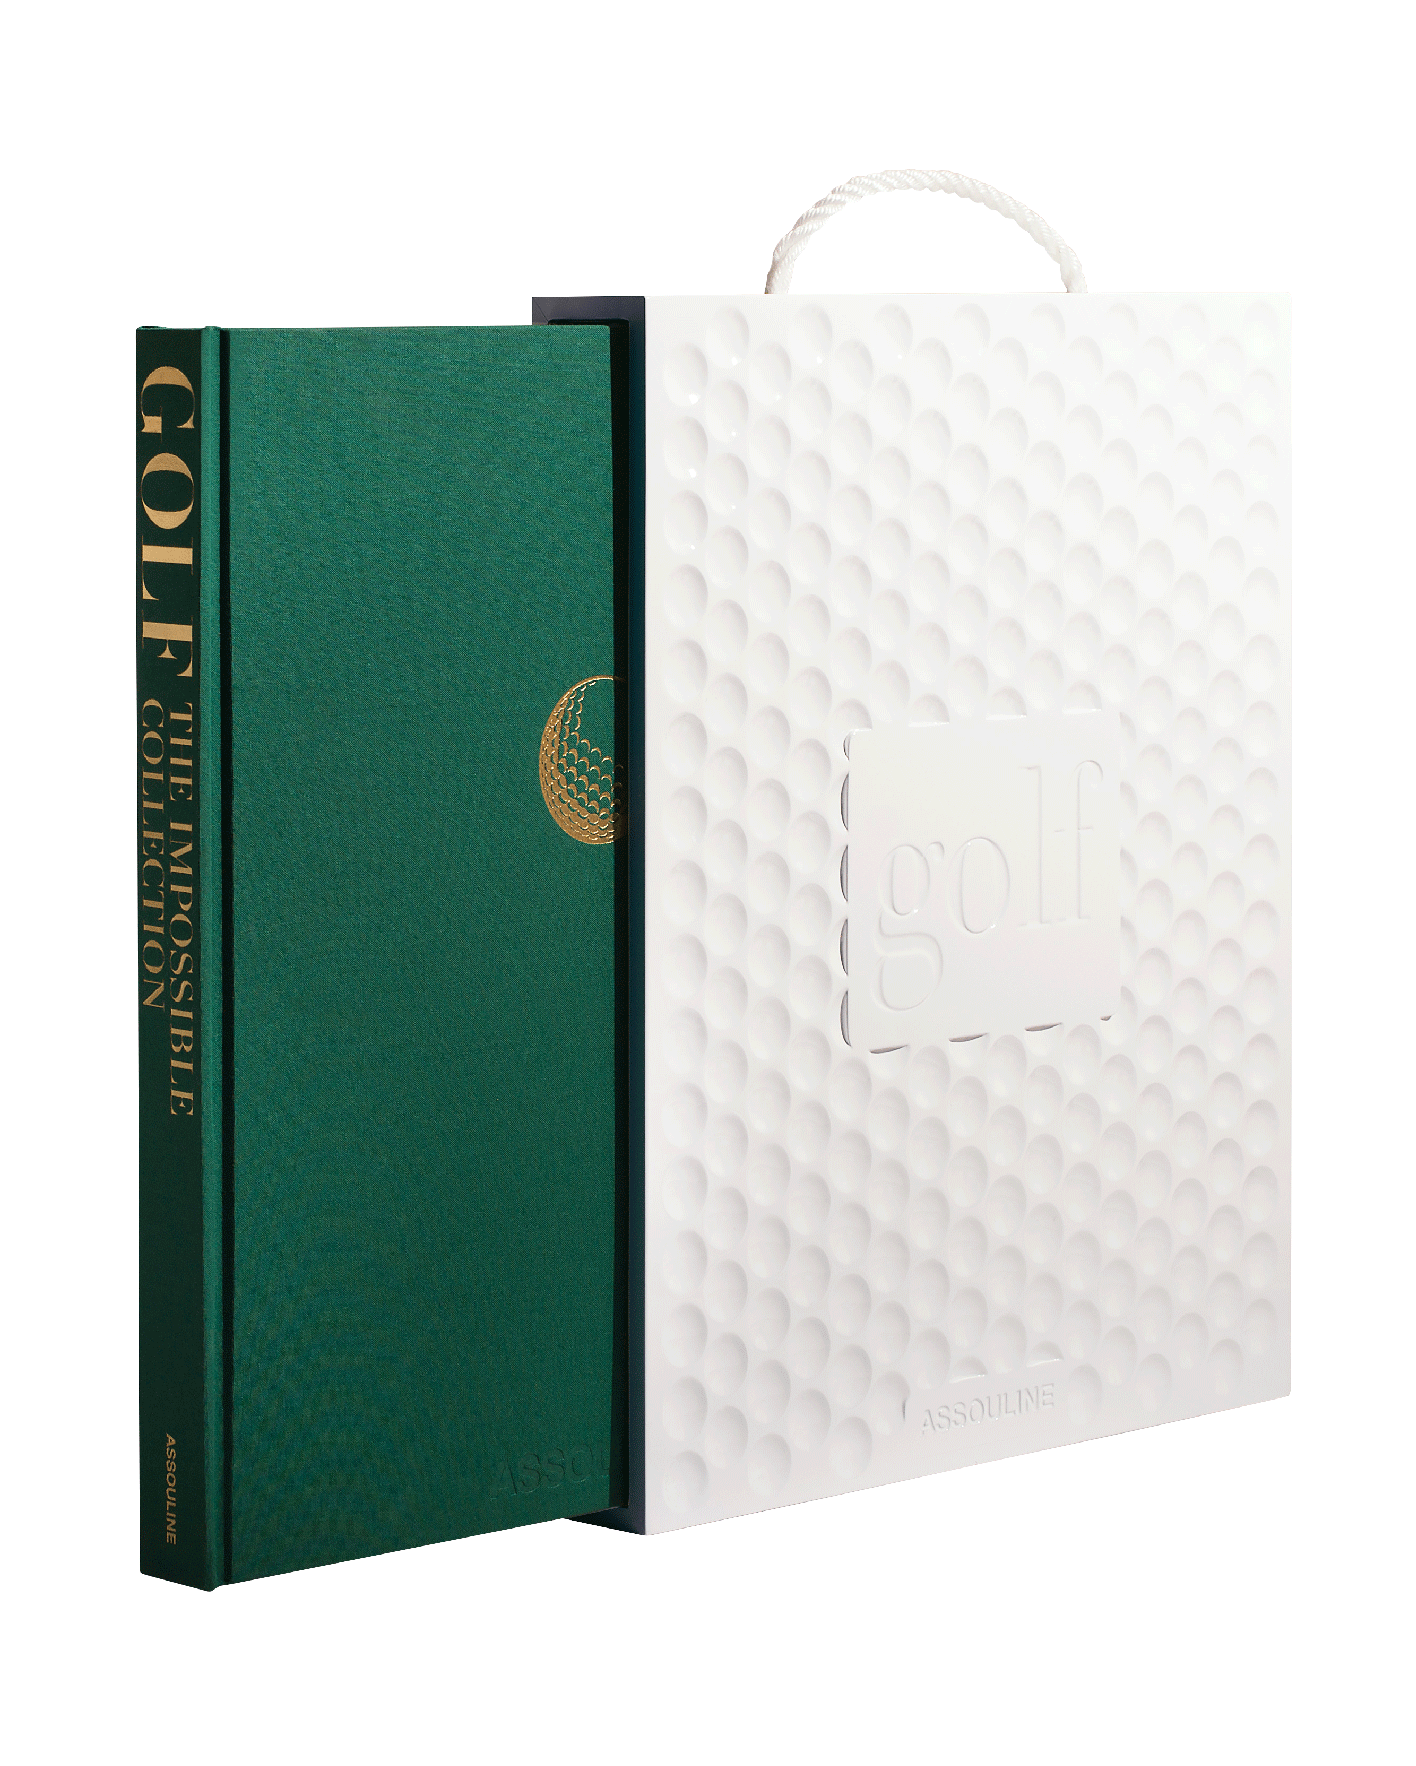 Impossible collection of Golf Assouline libro